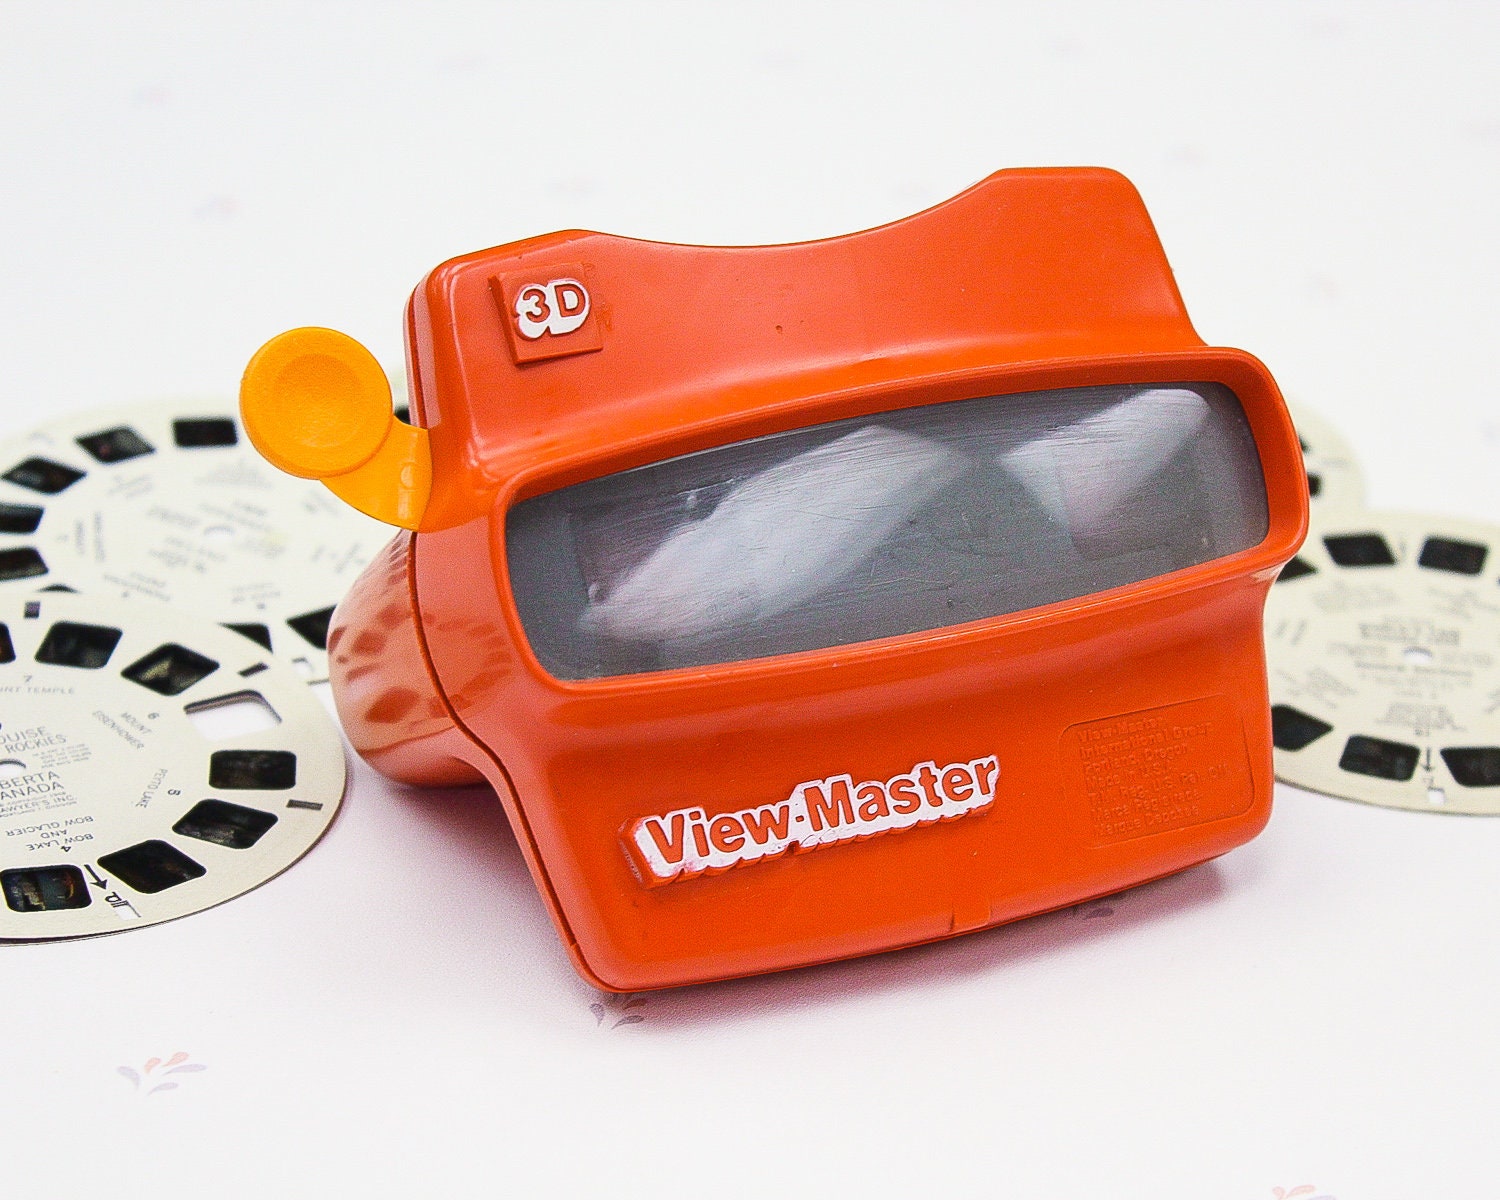 118 Reel View Master Old Images, Stock Photos, 3D objects, & Vectors